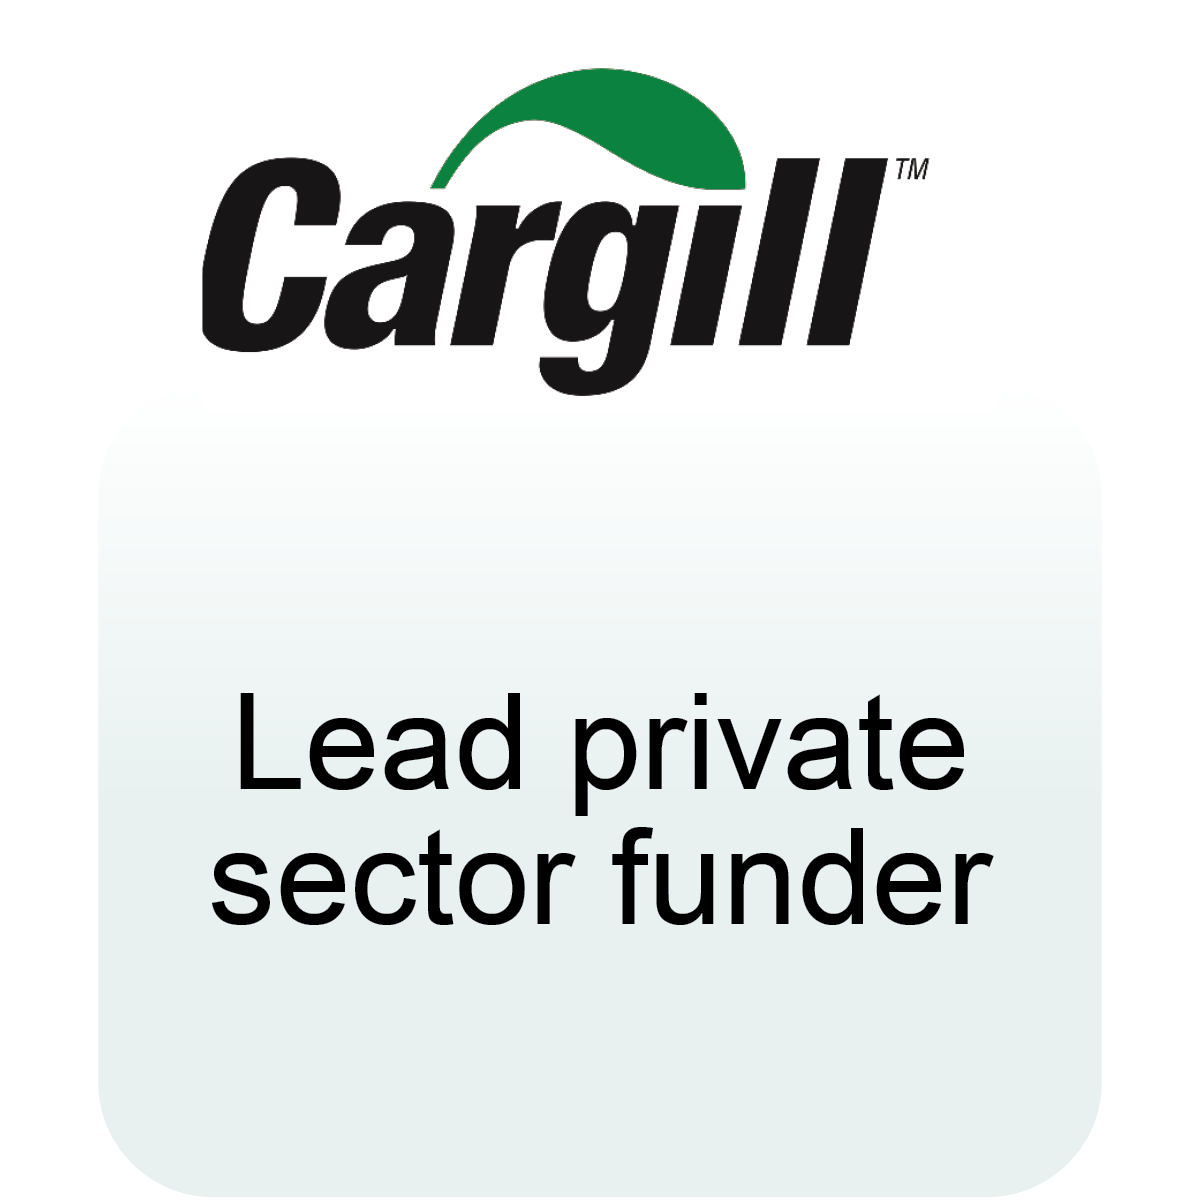 Cargill, Lead private sector funding